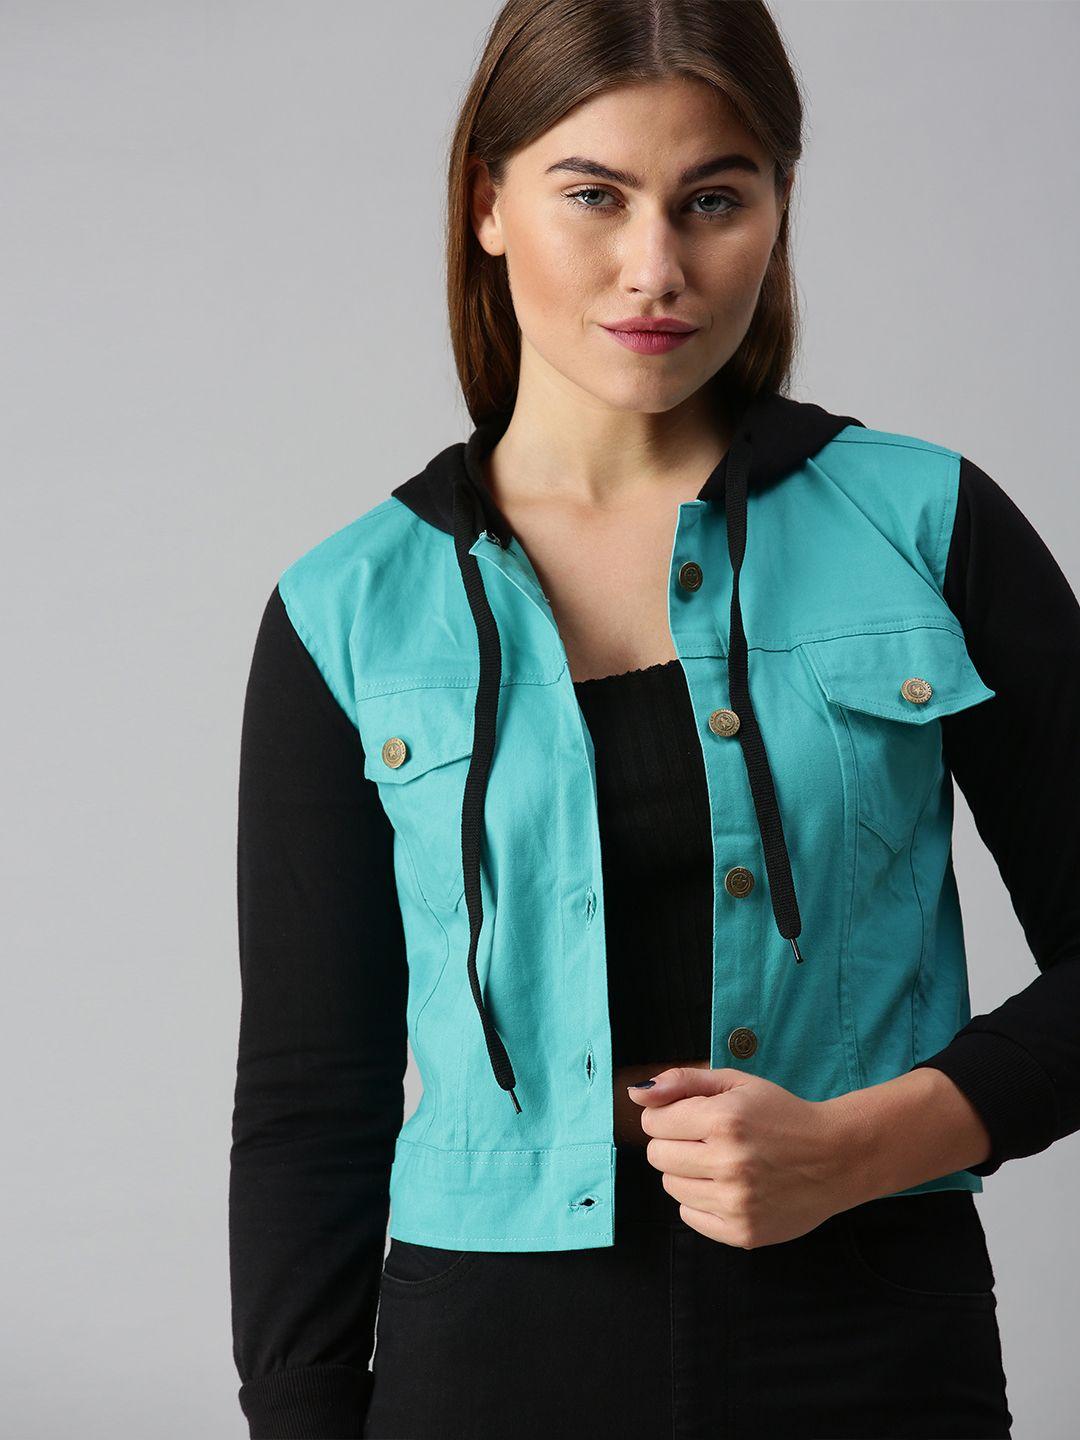 voxati women turquoise blue solidtailored jacket